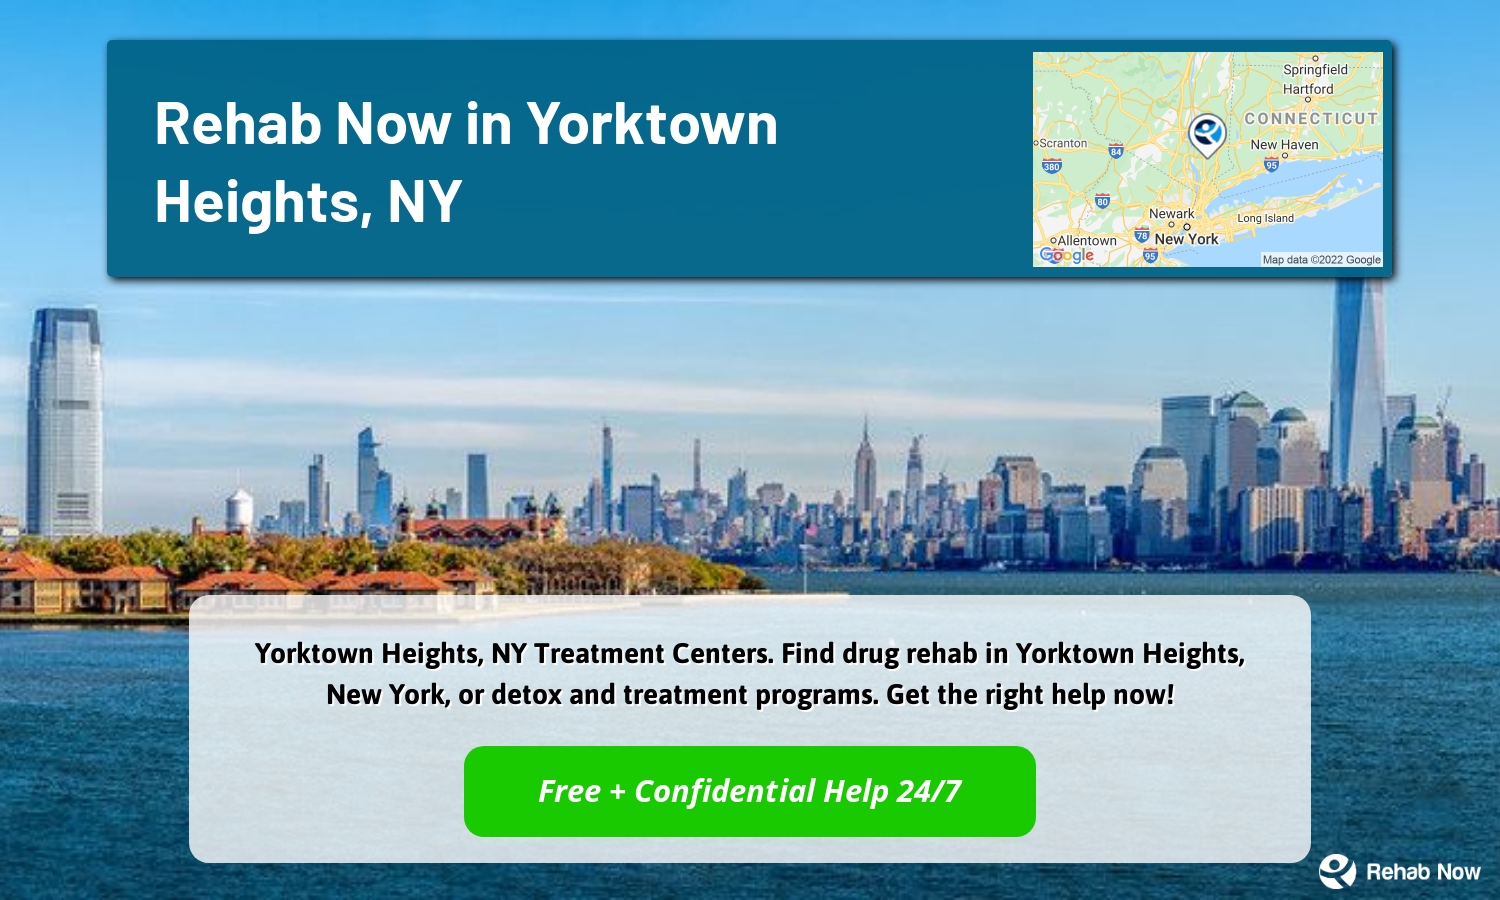 Yorktown Heights, NY Treatment Centers. Find drug rehab in Yorktown Heights, New York, or detox and treatment programs. Get the right help now!